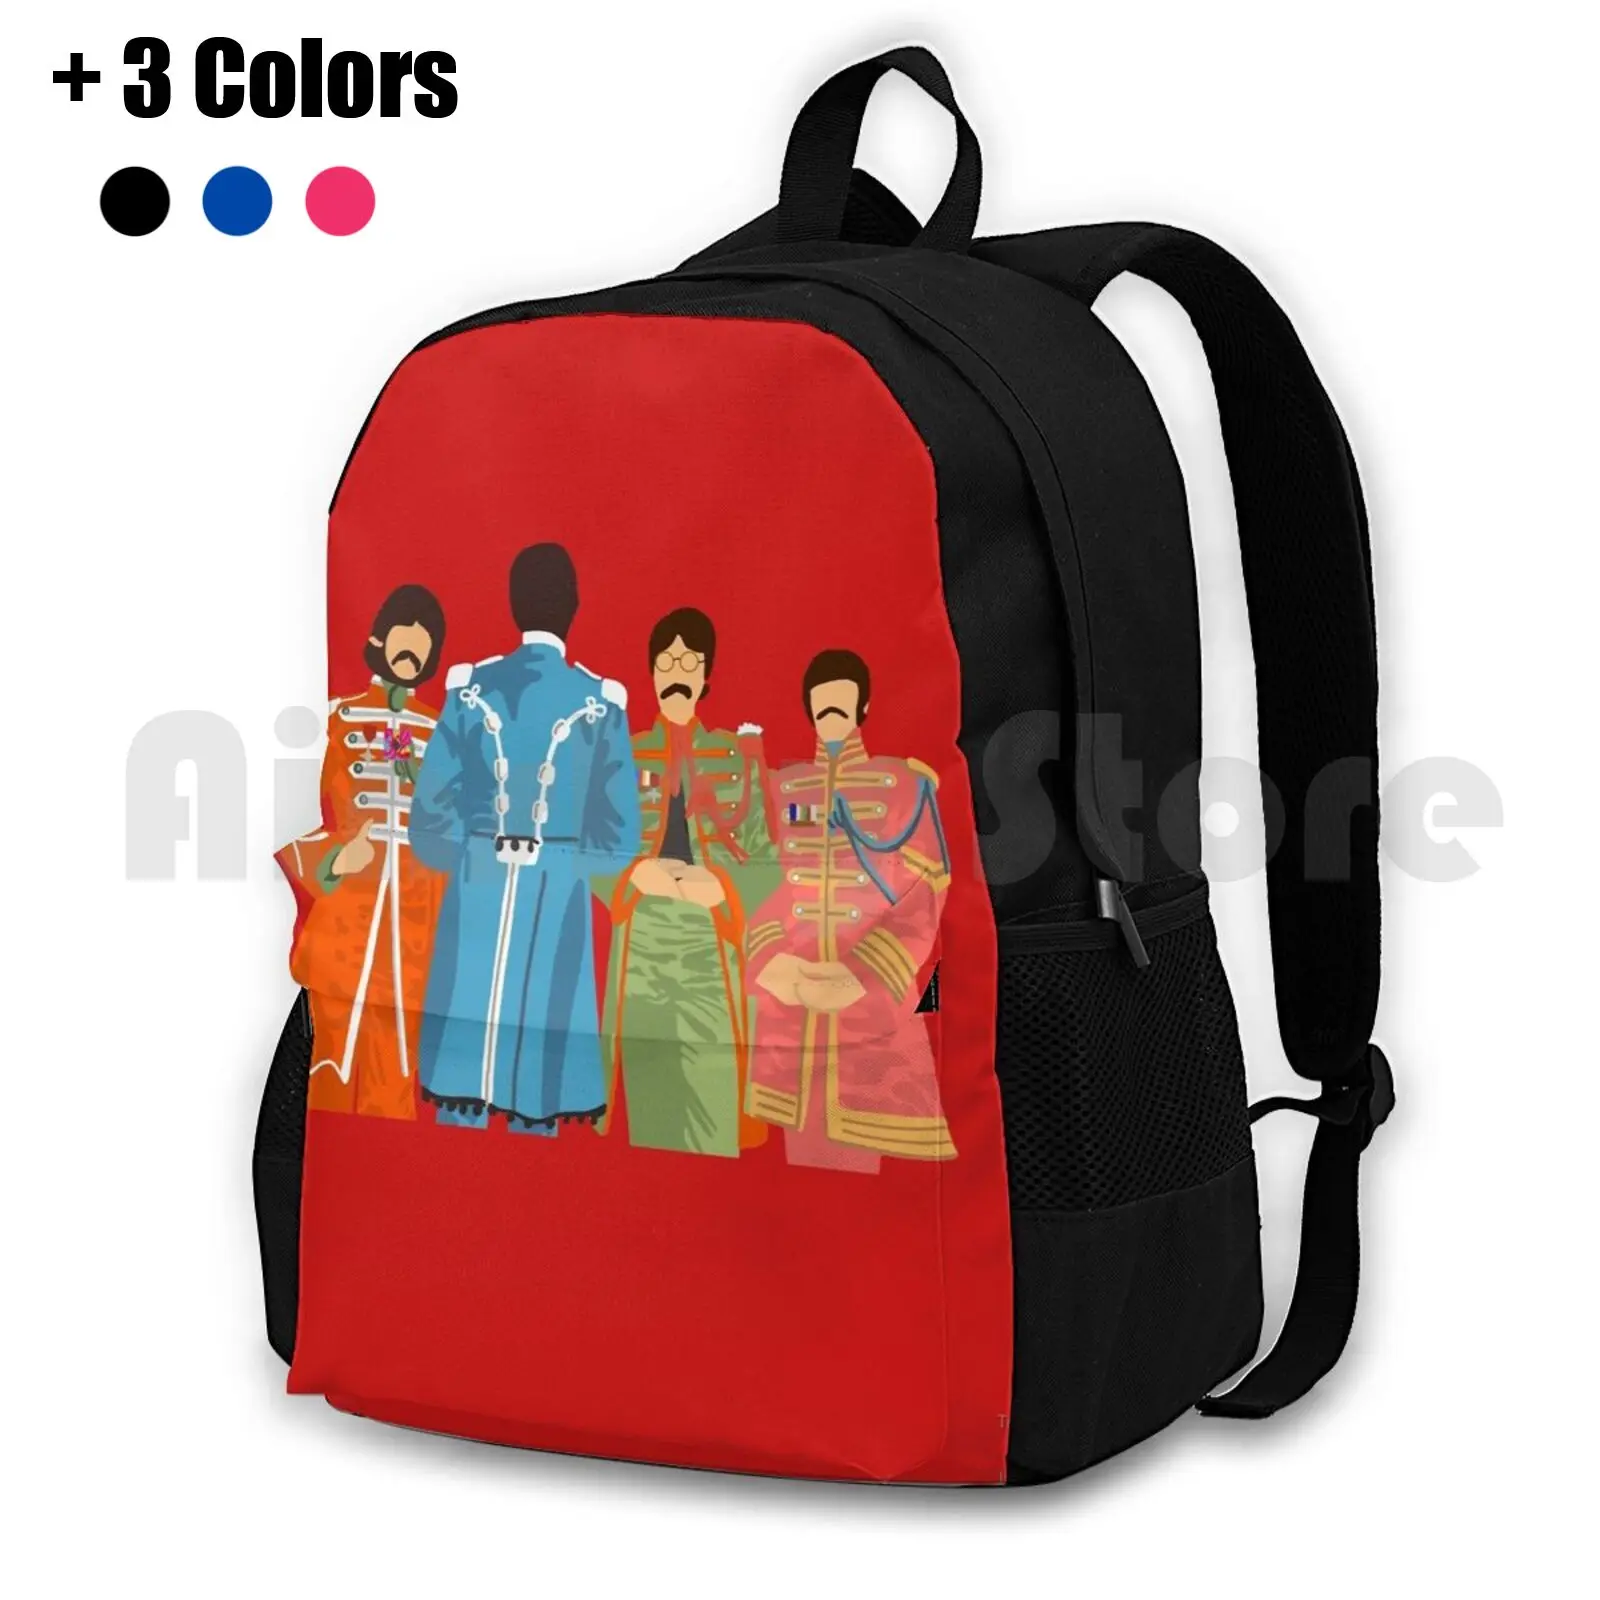 

Salt Soldiers Outdoor Hiking Backpack Riding Climbing Sports Bag 60S Music Band Sgt Peppers Trippy Hippy Psychedelic